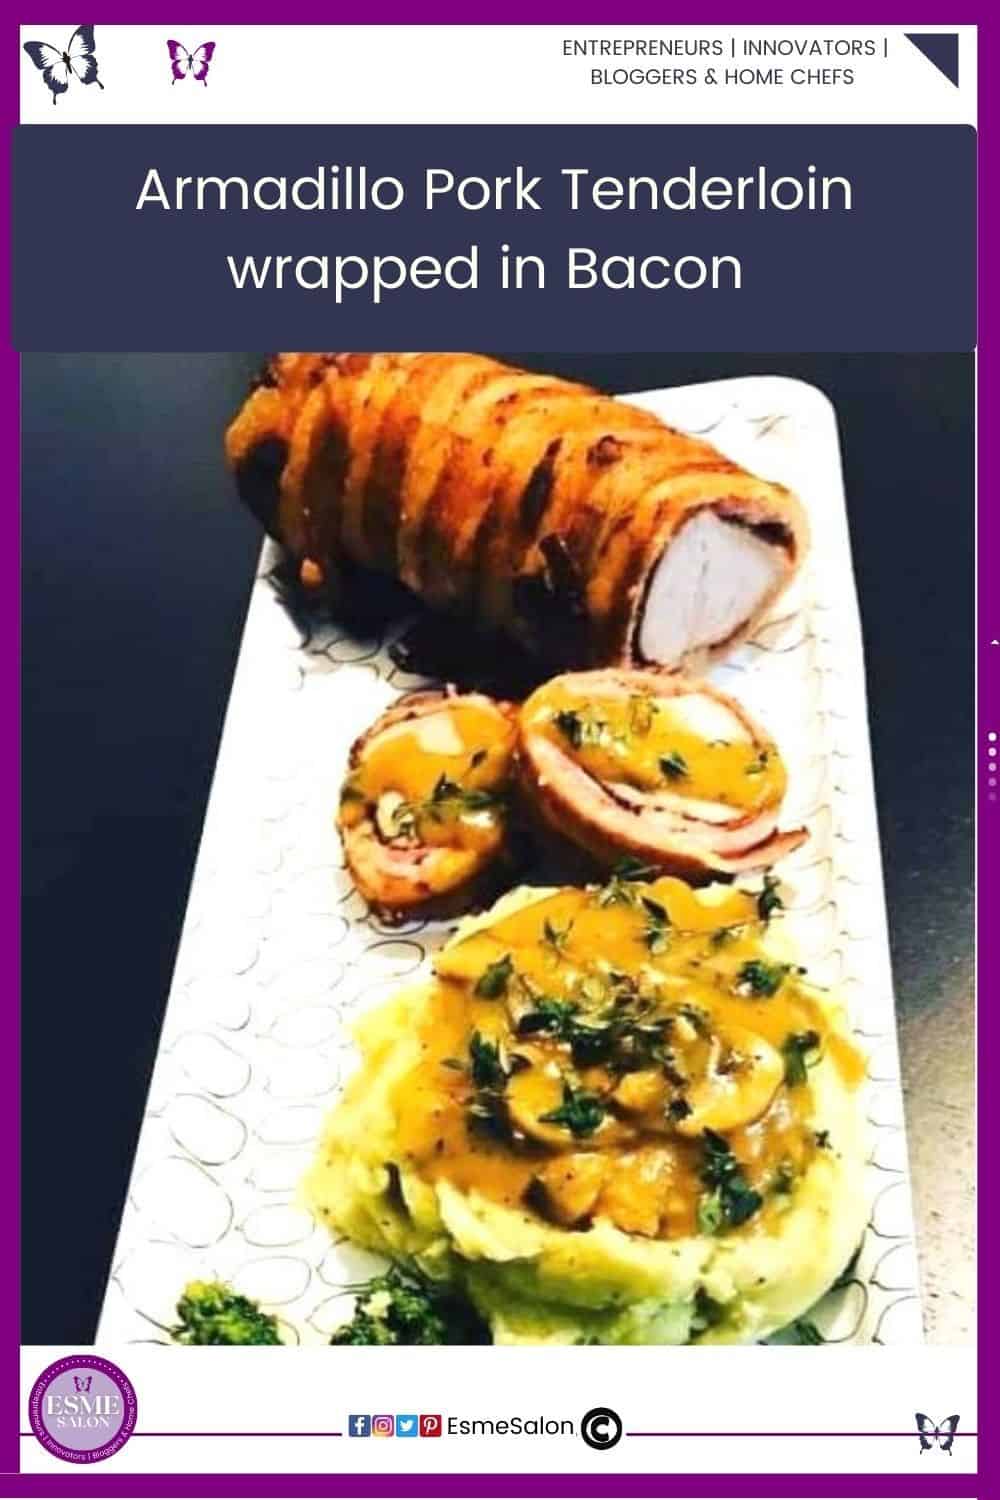 an image of a Pork Tenderloin wrapped in Bacon on a white platter sliced and served with herbed Mushroom Gravy